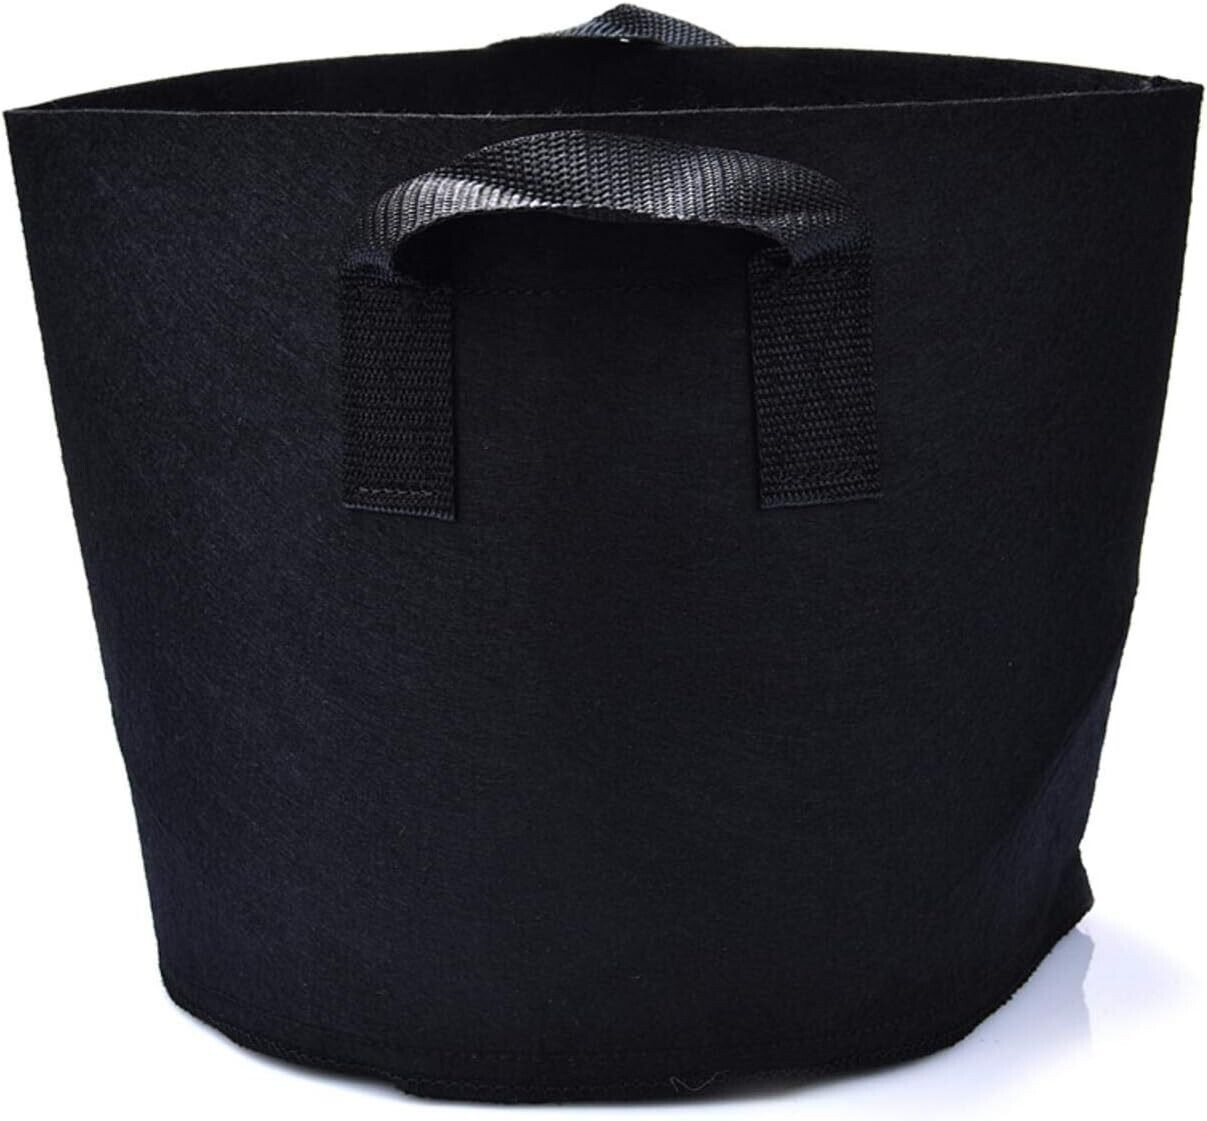 Planting Bag/Grow Bag Fabric Pots Nursery Bags with Handles Plant Seeding Bags Container - 15 Gallon Capacity